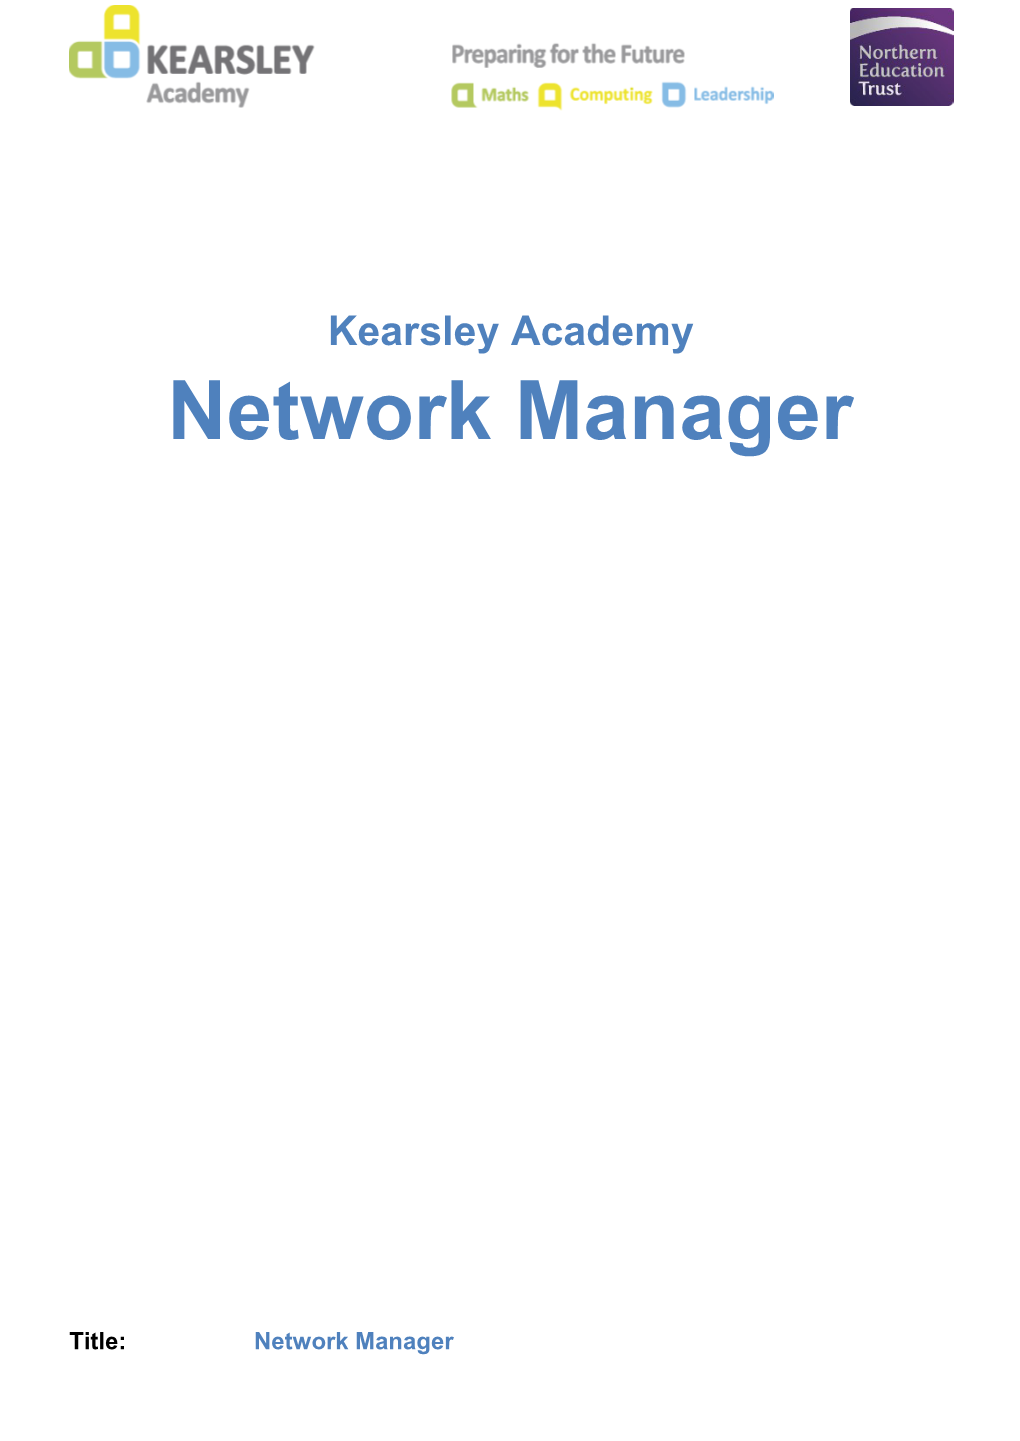 Title:Network Manager